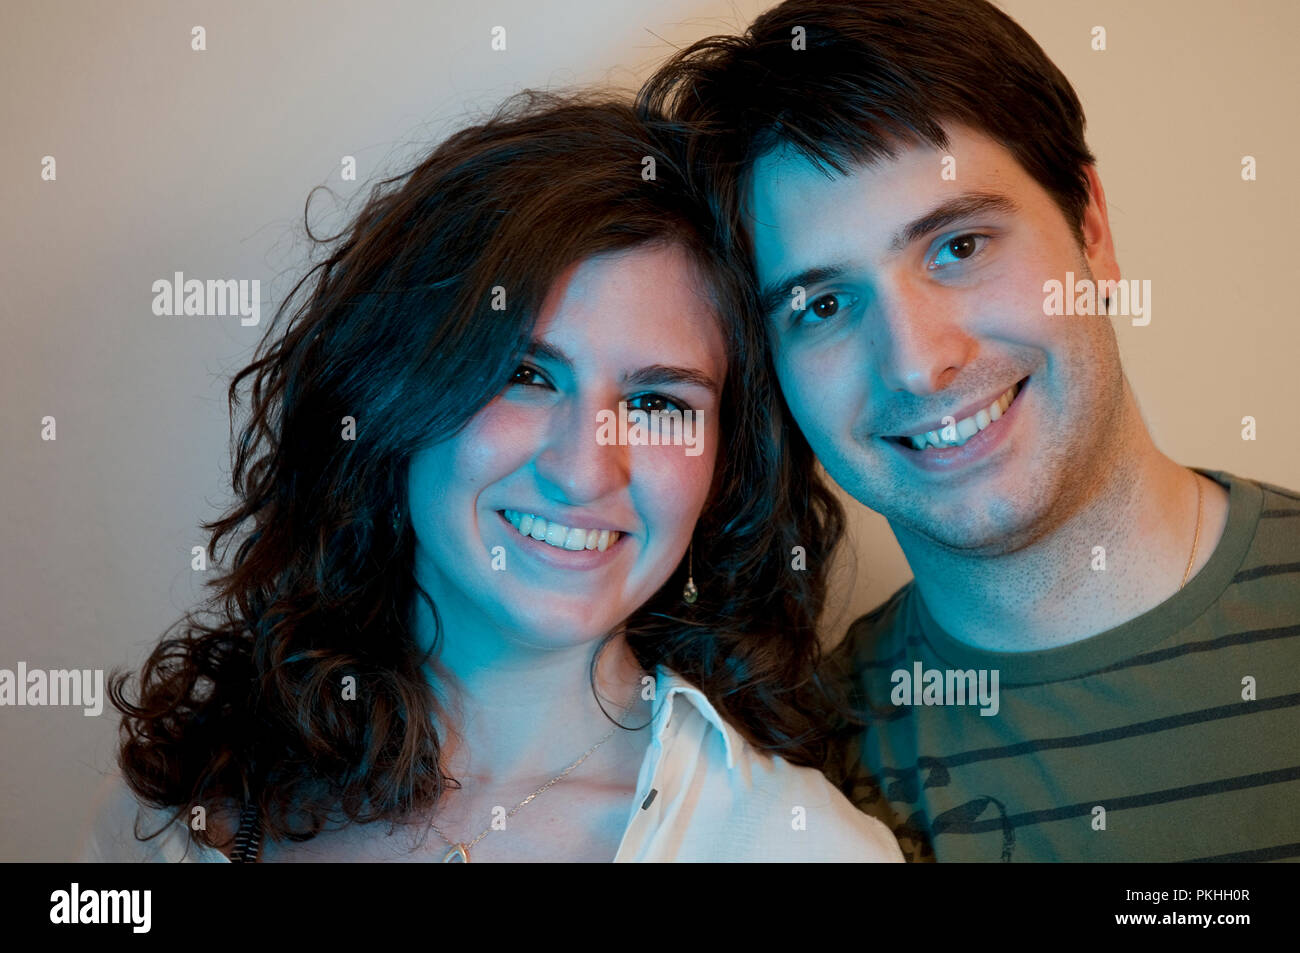 Young couple smiling and looking at the camera. Stock Photo